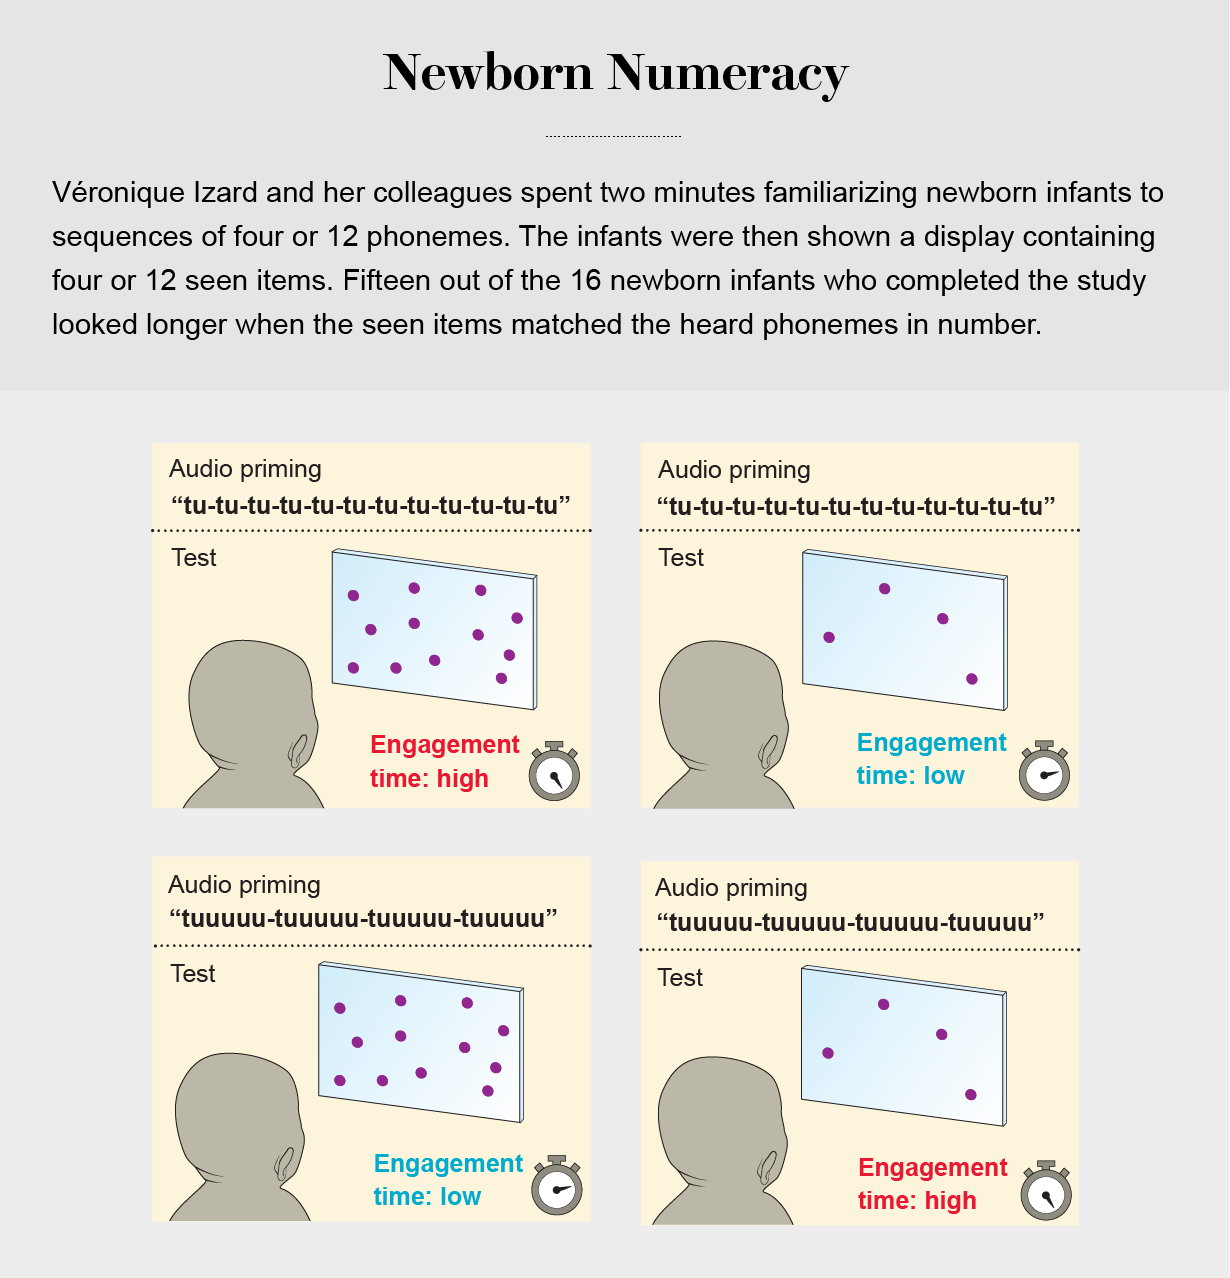 Graphic depicts an experiment in which infants were shown displays containing certain numbers of items while hearing sequences of phonemes. The babies looked longer when the number of seen items matched the number of times the phoneme was repeated.